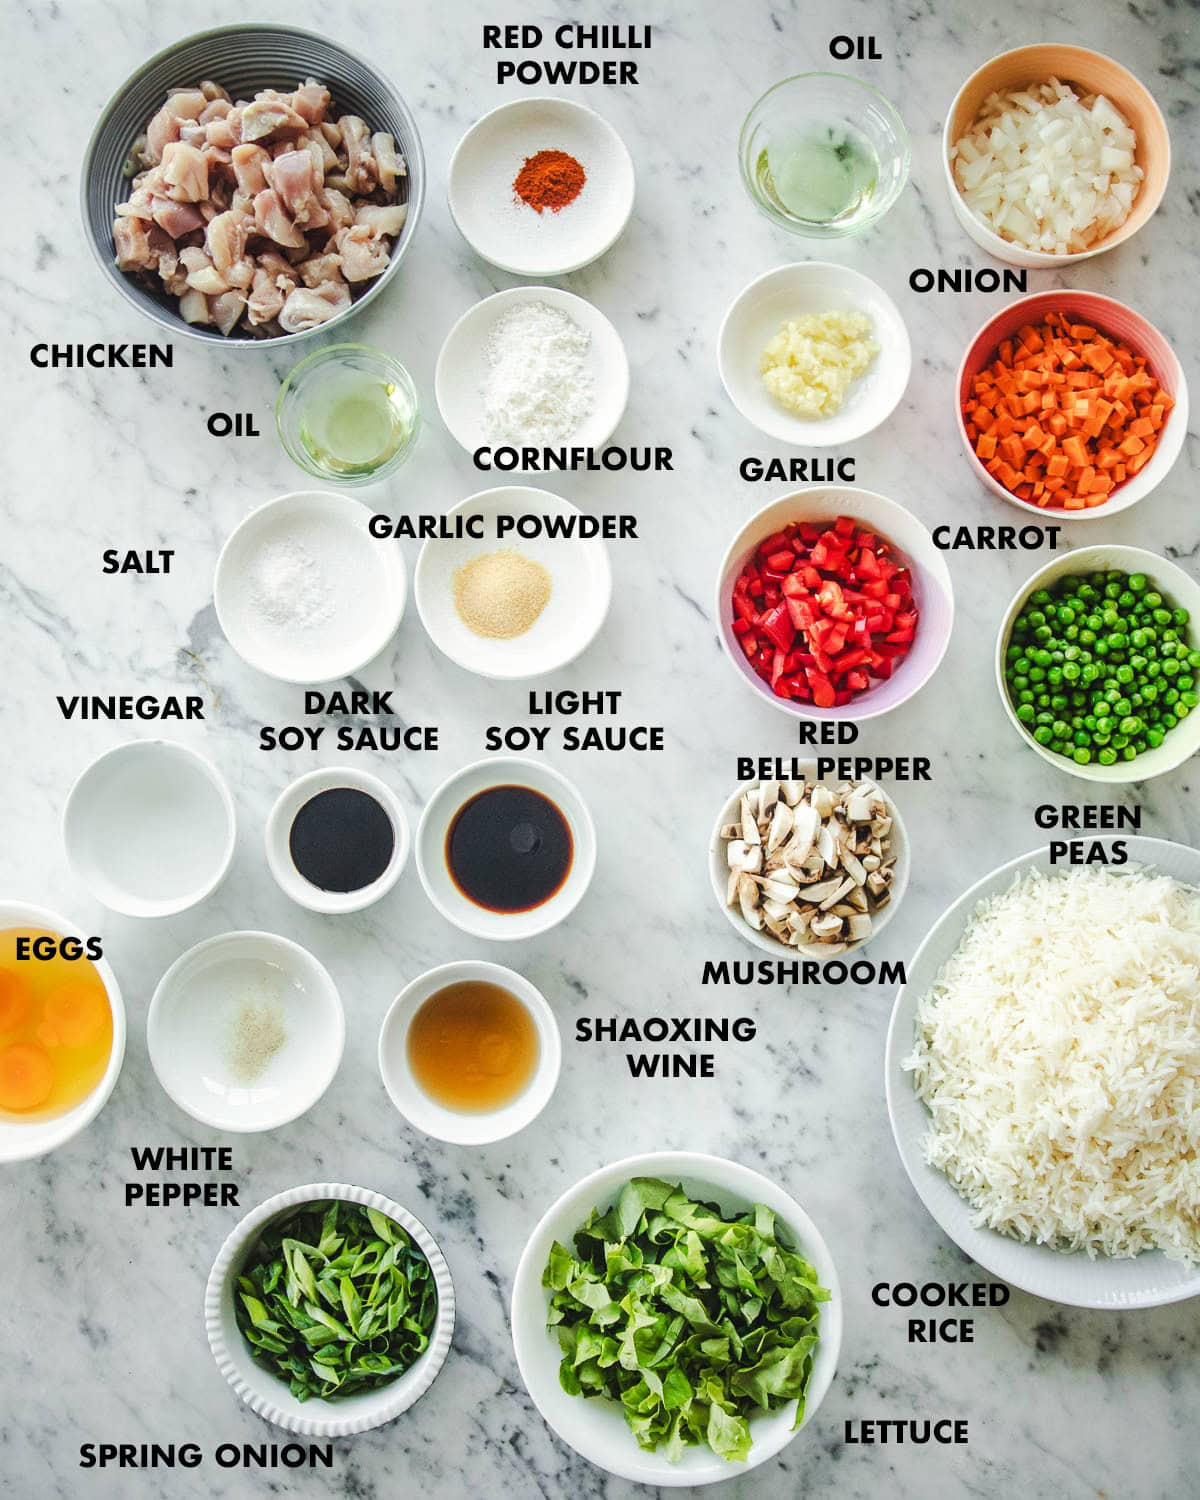 Ingredients for Chicken Fried Rice measured and labeled - Chicken, cooked rice, spring onion, green peas, lettuce, carrot, red bell pepper, mushroom, soy sauce, cornflour, shaoxing wine, white pepper, garlic, eggs and red chilli powder.